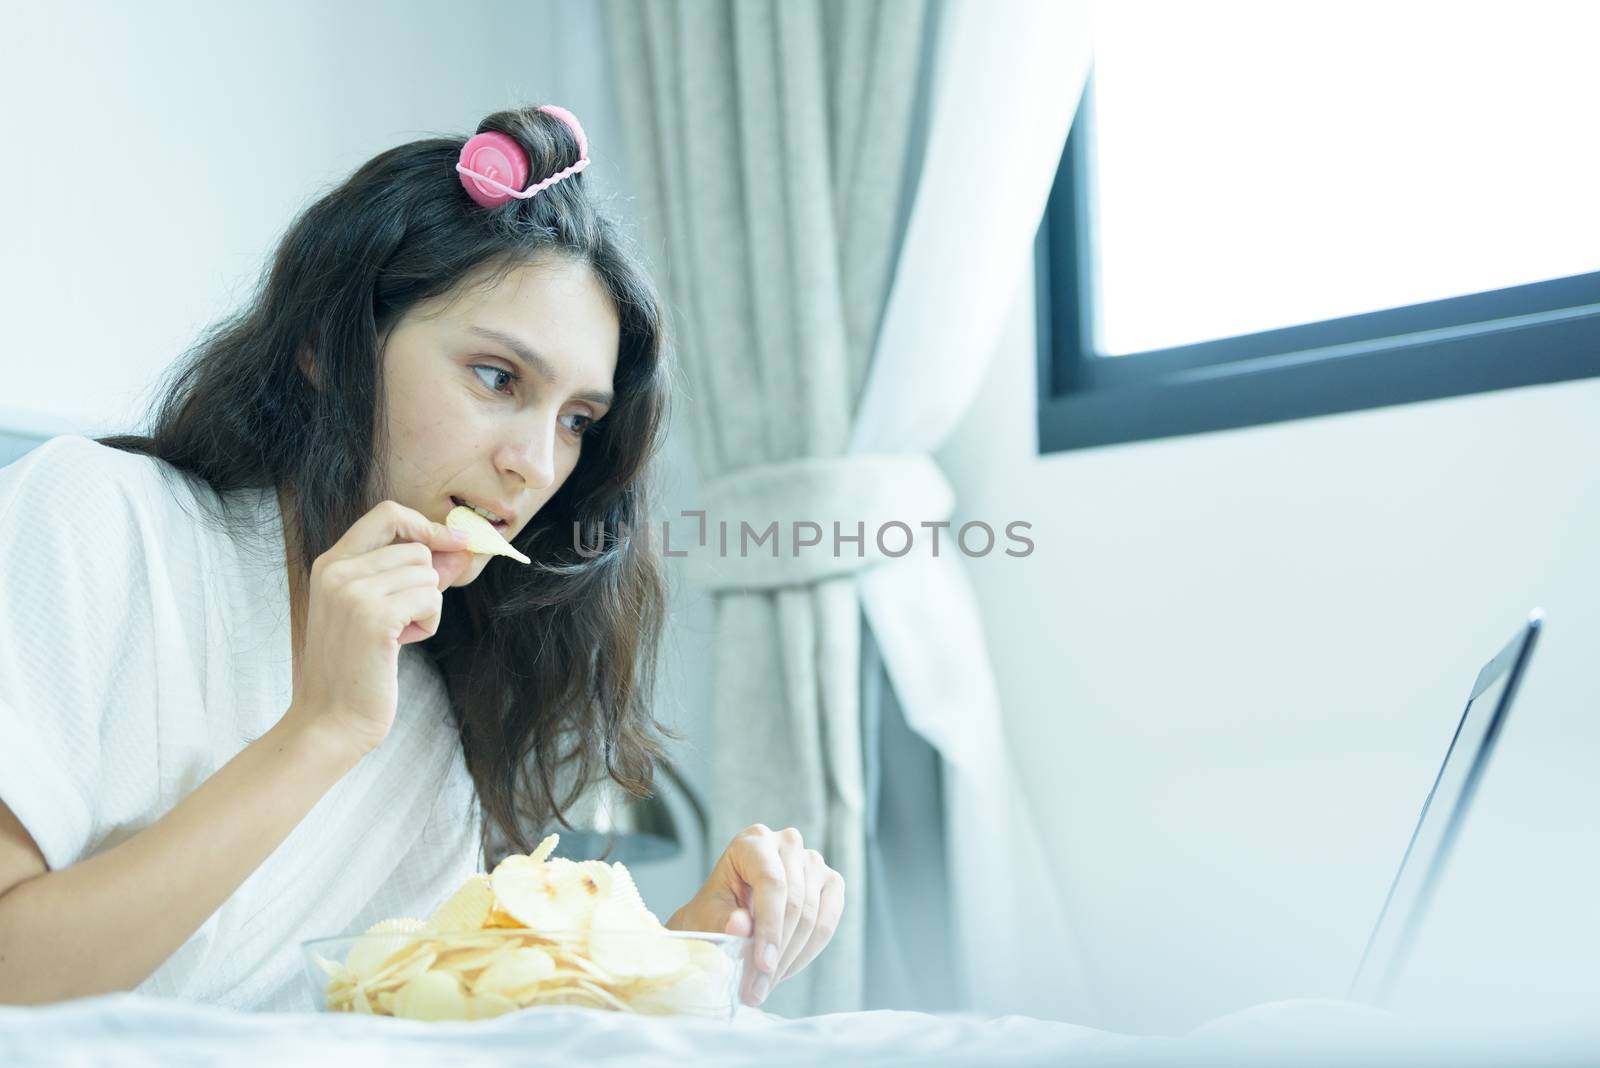 A beautiful woman eating snack potato and playing laptop with lying down on the bed and happiness at a condominium in the morning.